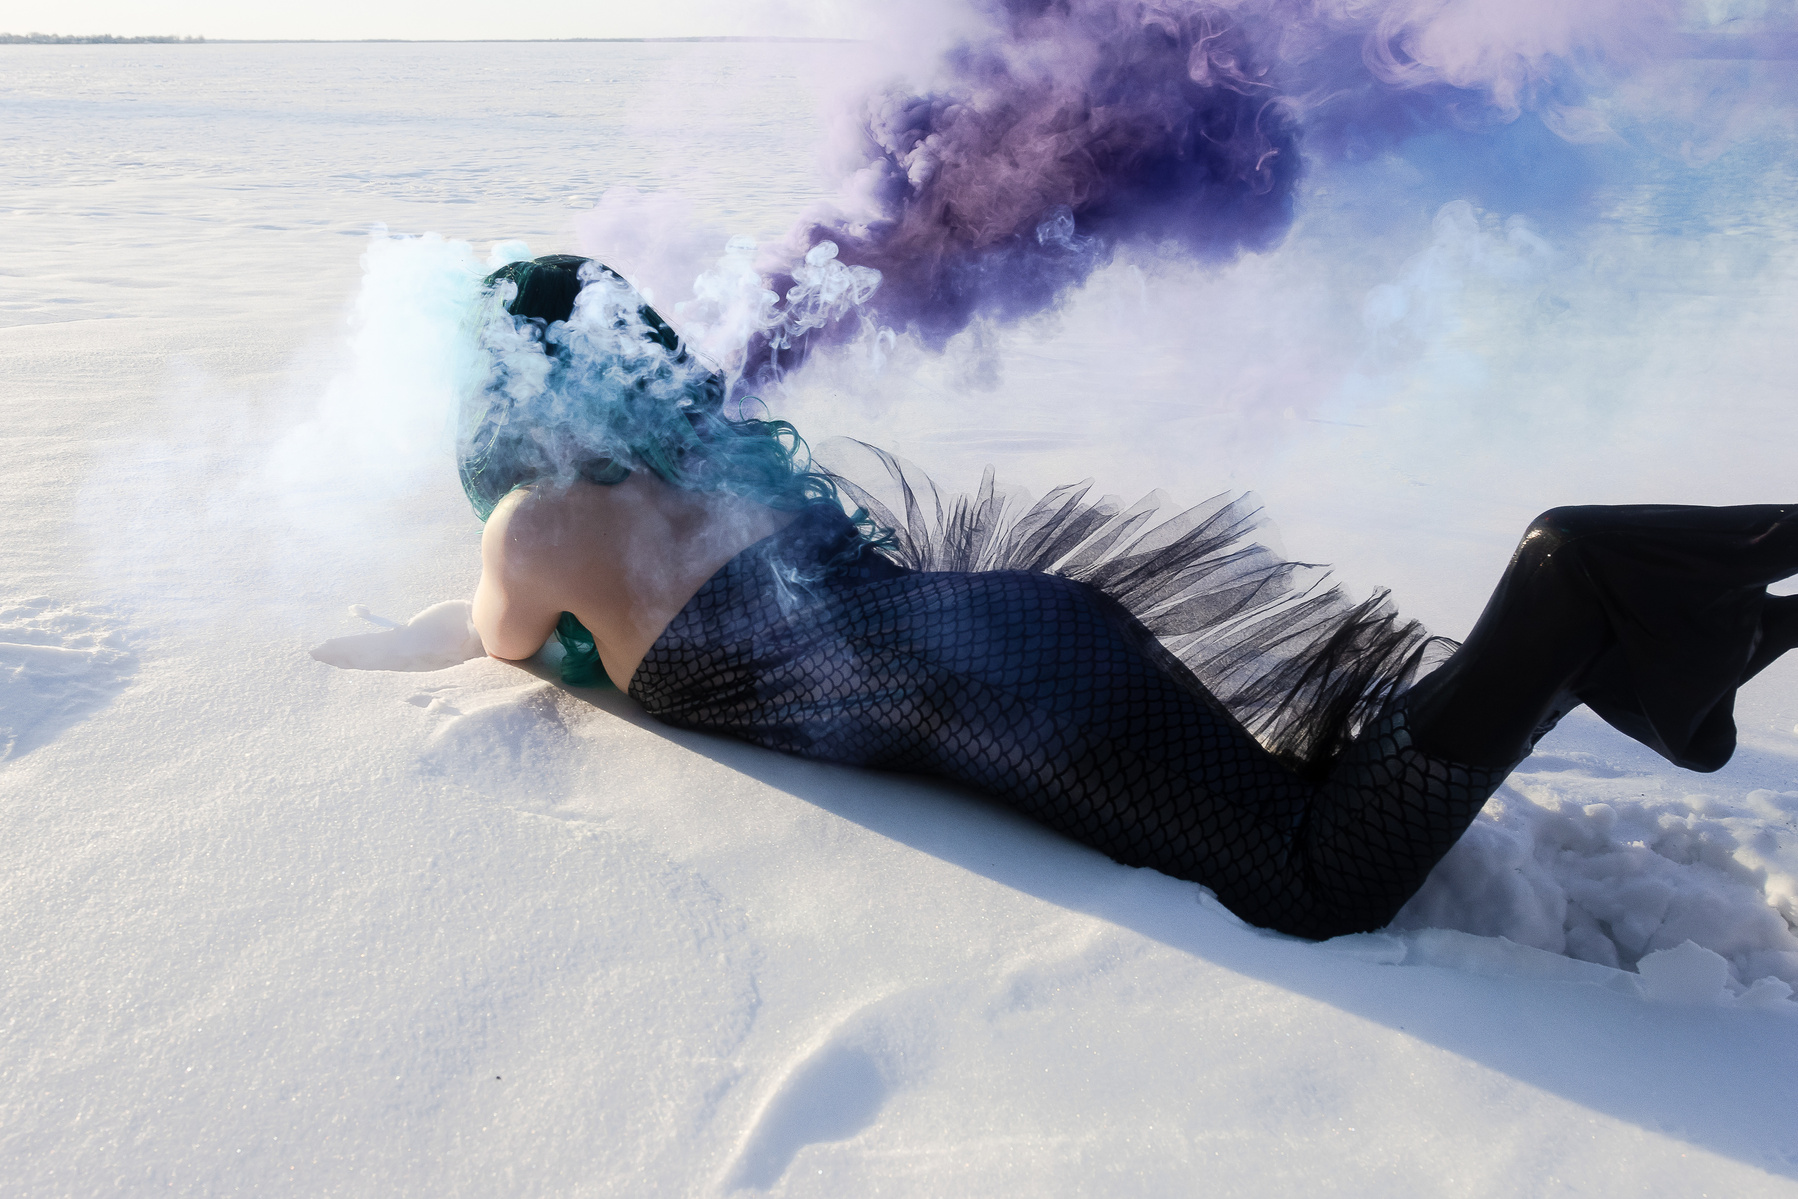 Graphic for the artwork, Sedna | ᓴᓐᓇ #6. On top of the image is a photograph of a woman with long dark green/blue hair lying on her stomach on the snow. The woman’s full body is in frame wearing a mermaid tail with black fabric on the side while her shoulders are exposed. There are plumes of grey, blue, and purple smoke coming from her head.